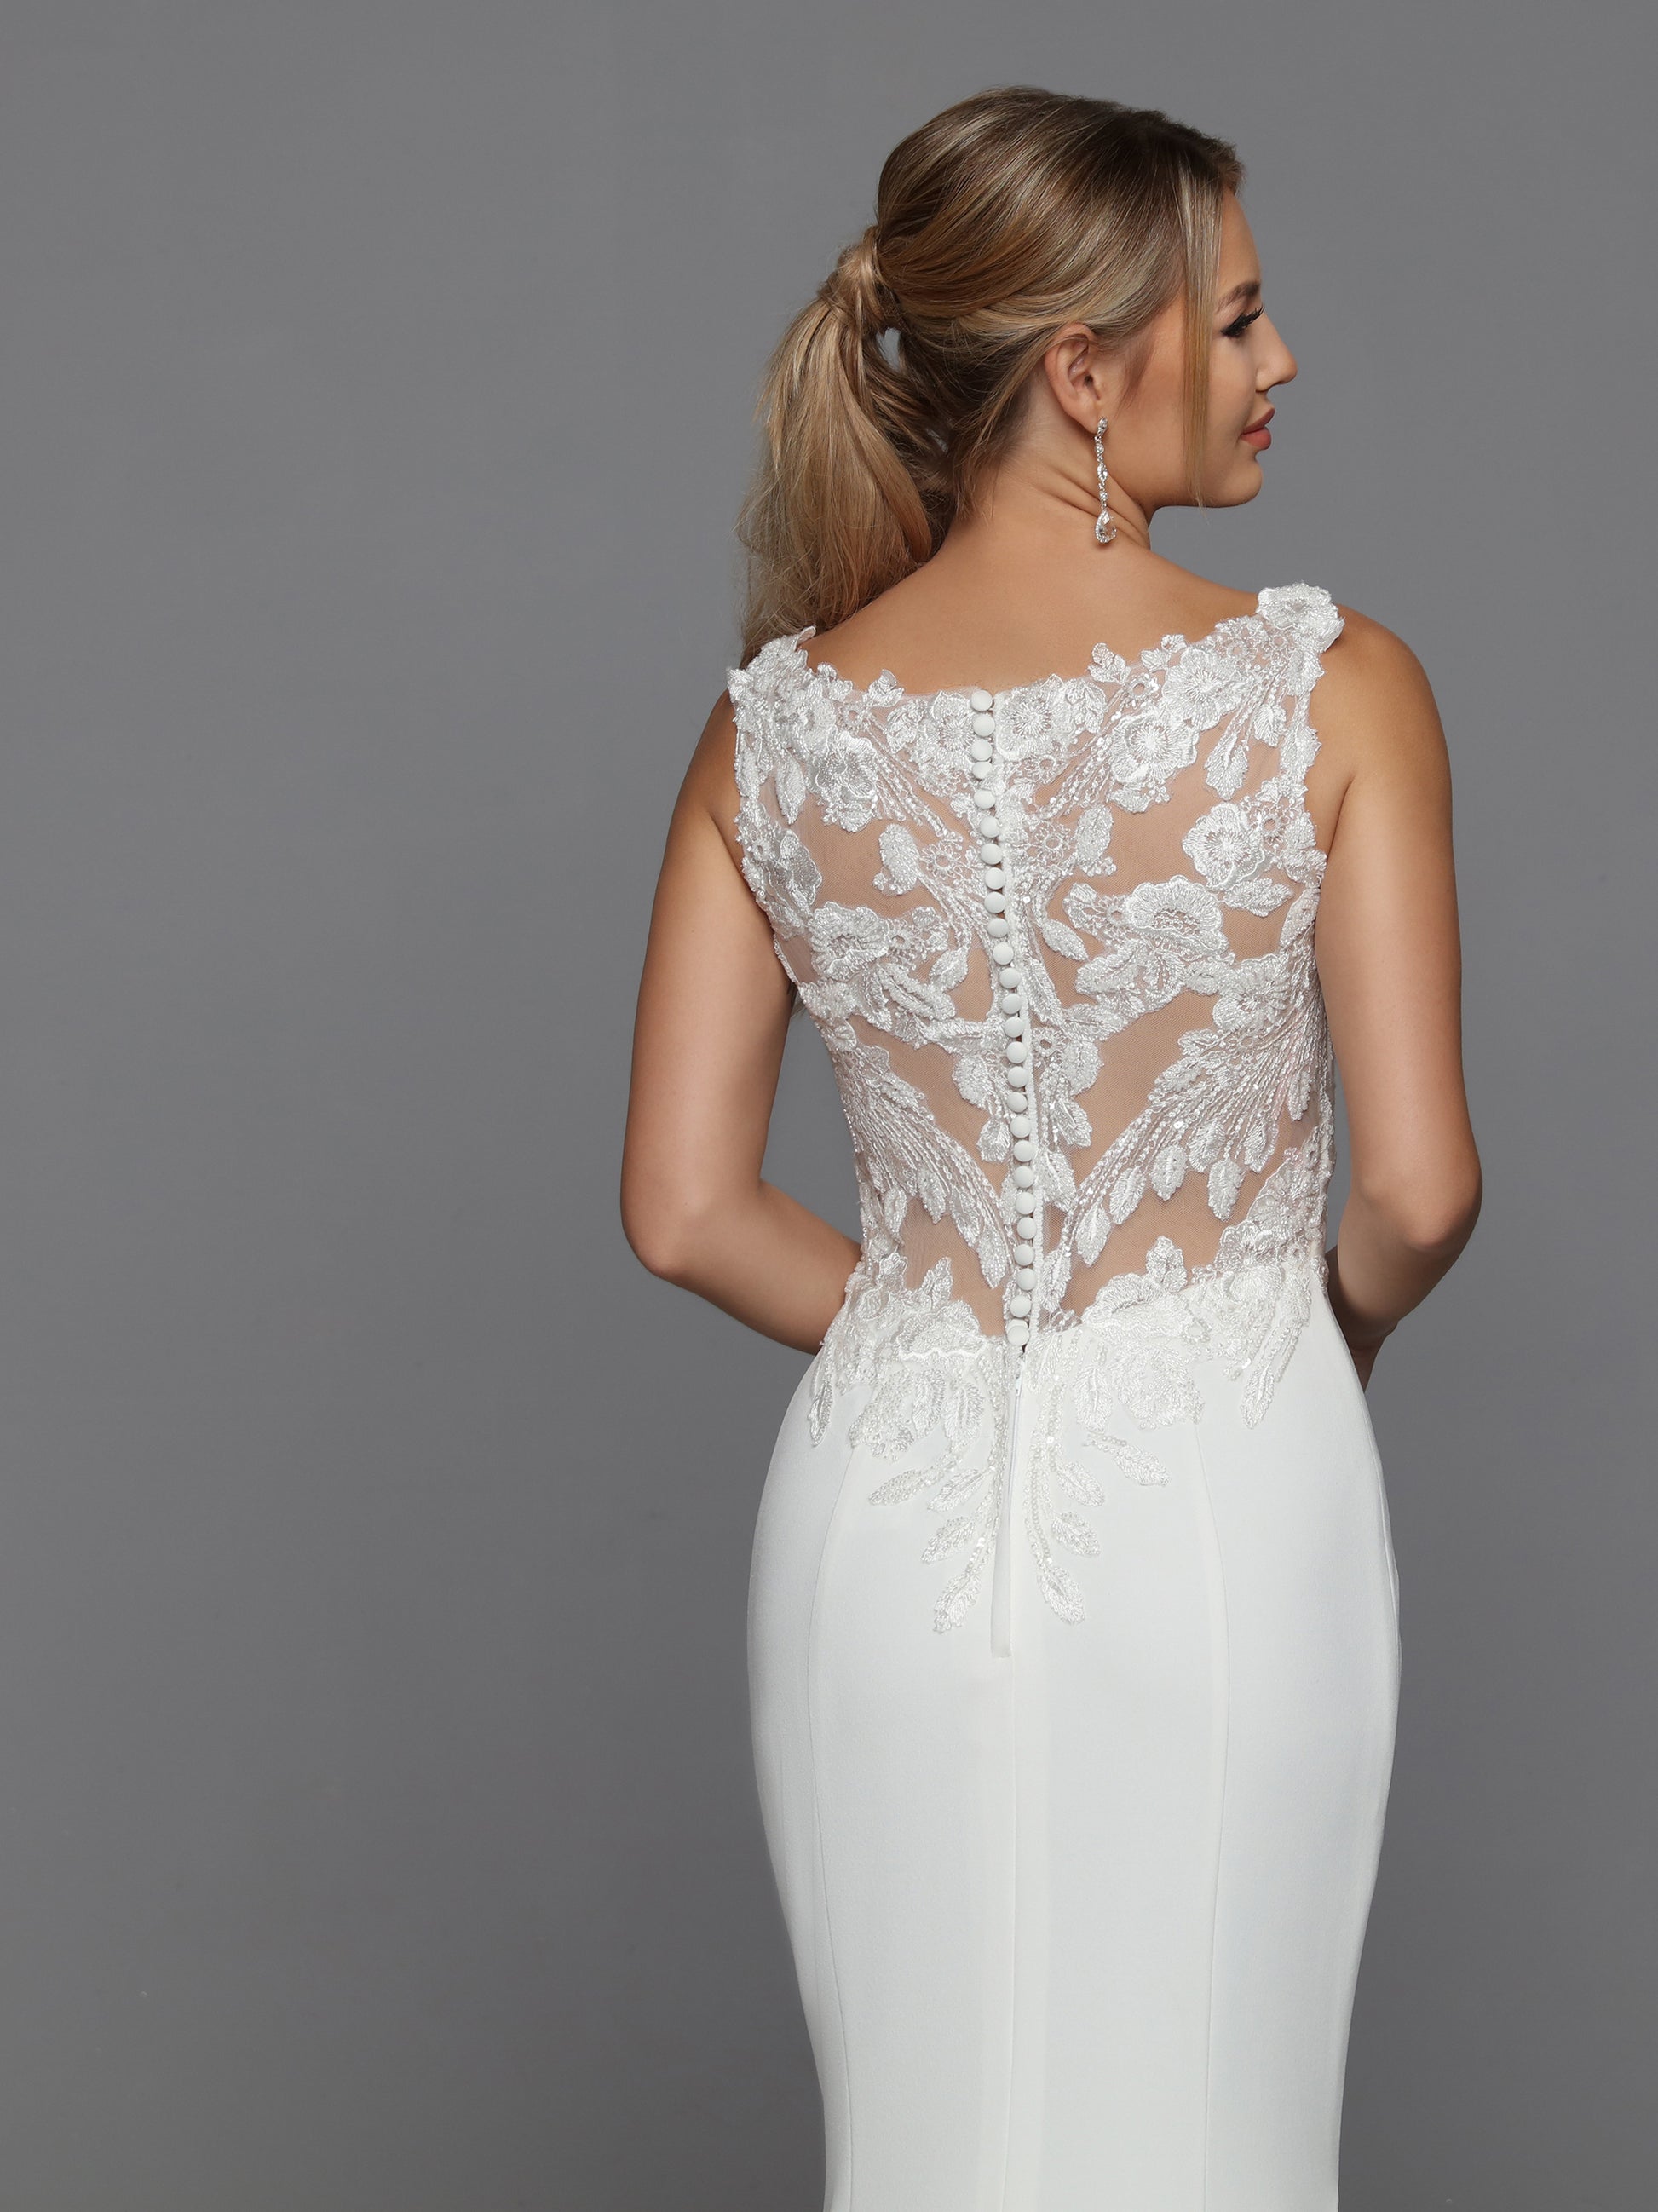 DaVinci Bridal 50776 Fit And Flare V-Neck Sheer Lace Applique Back Bodice Sleeves Train Wedding Gown. Sleek and sophisticated, this crepe fit and flare gown features removable full-length lace sleeves, a sheer lace applique back bodice, and a column of lustrous crepe finished with a chapel train.